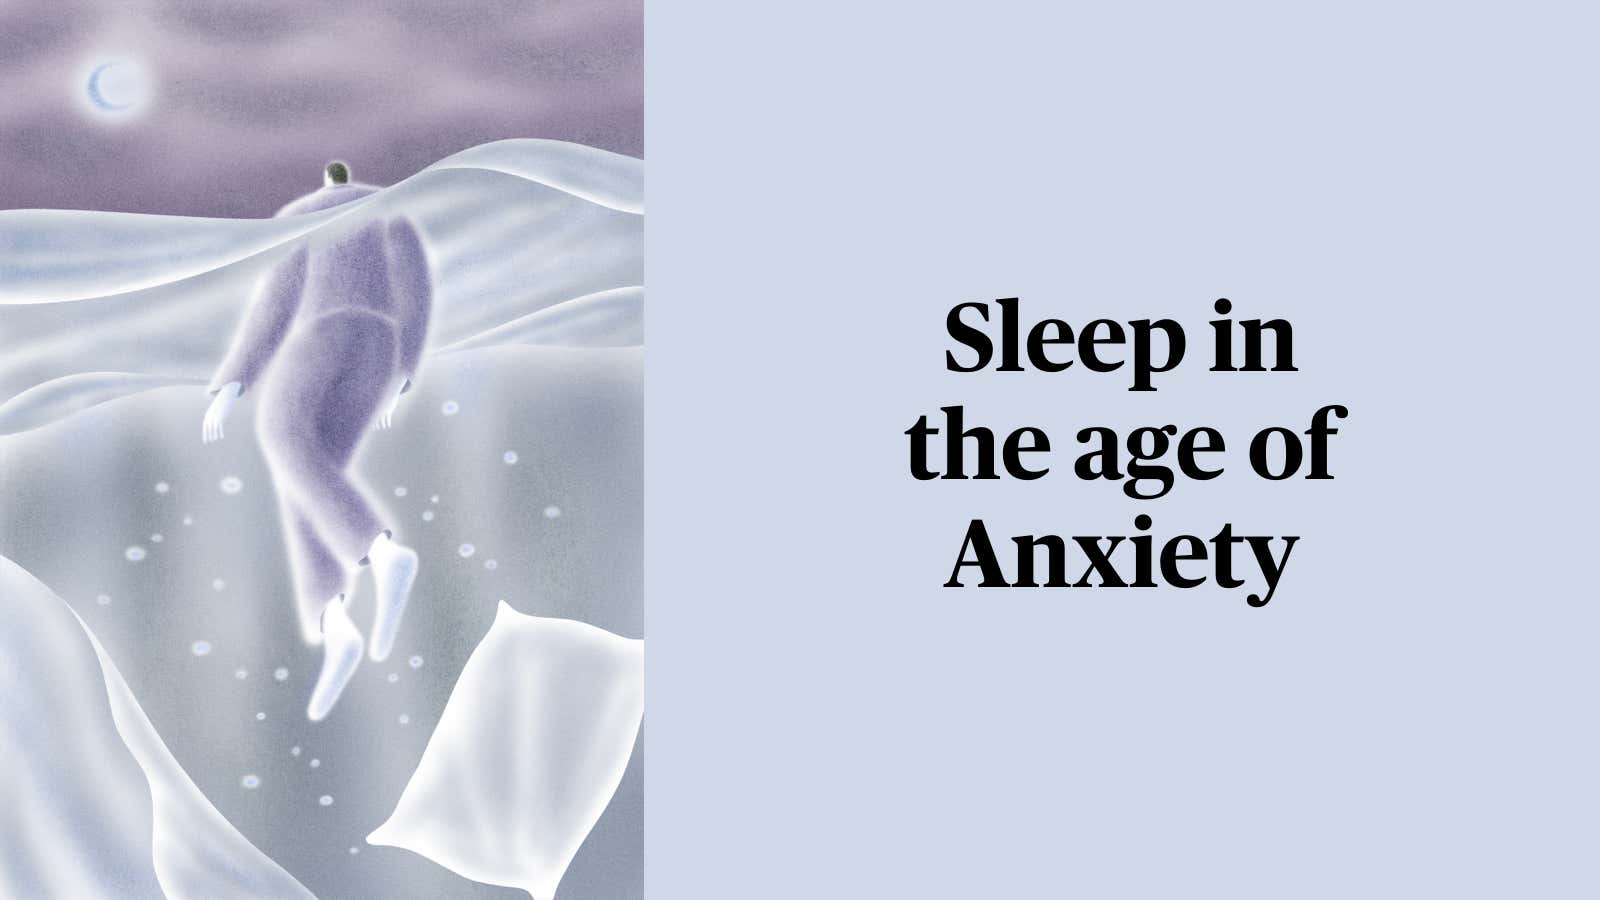 For members—Sleep in the age of anxiety